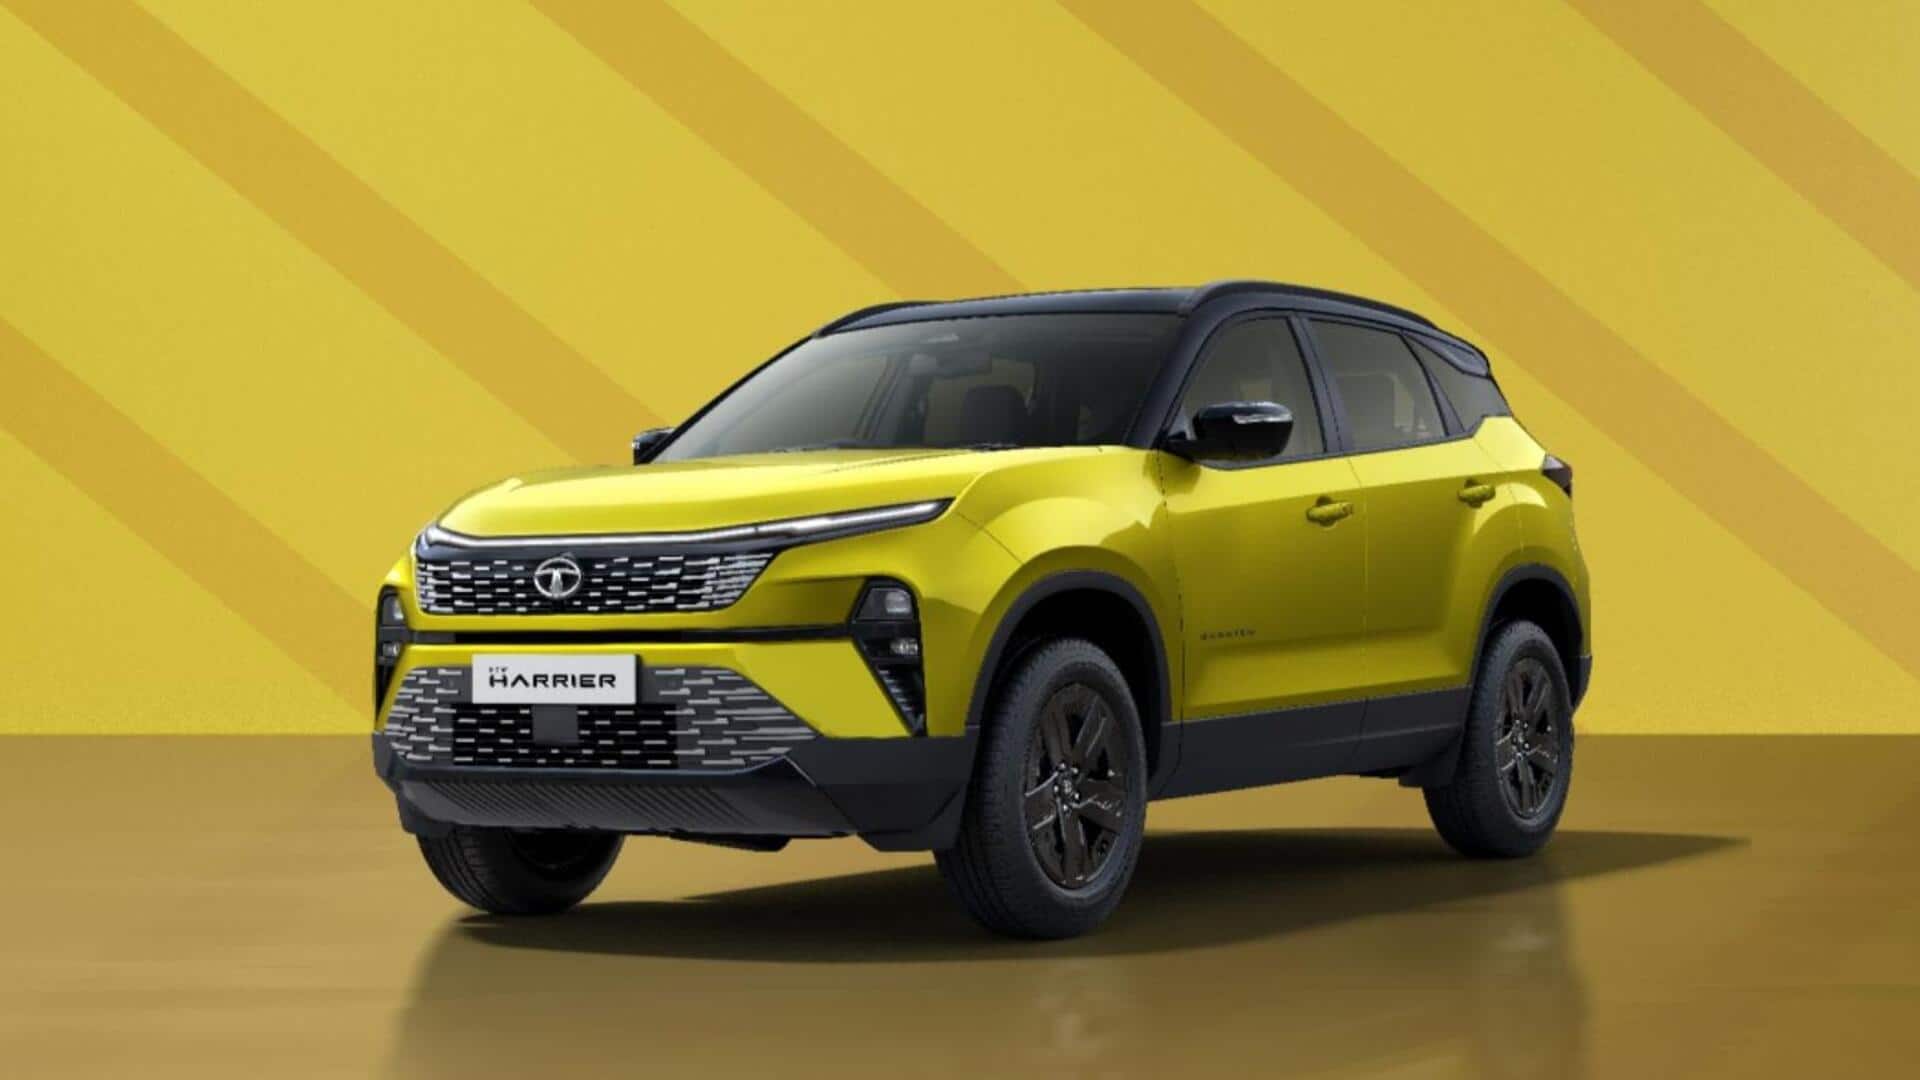 2023 Tata Harrier's variant-wise features explained: Which offers most value?